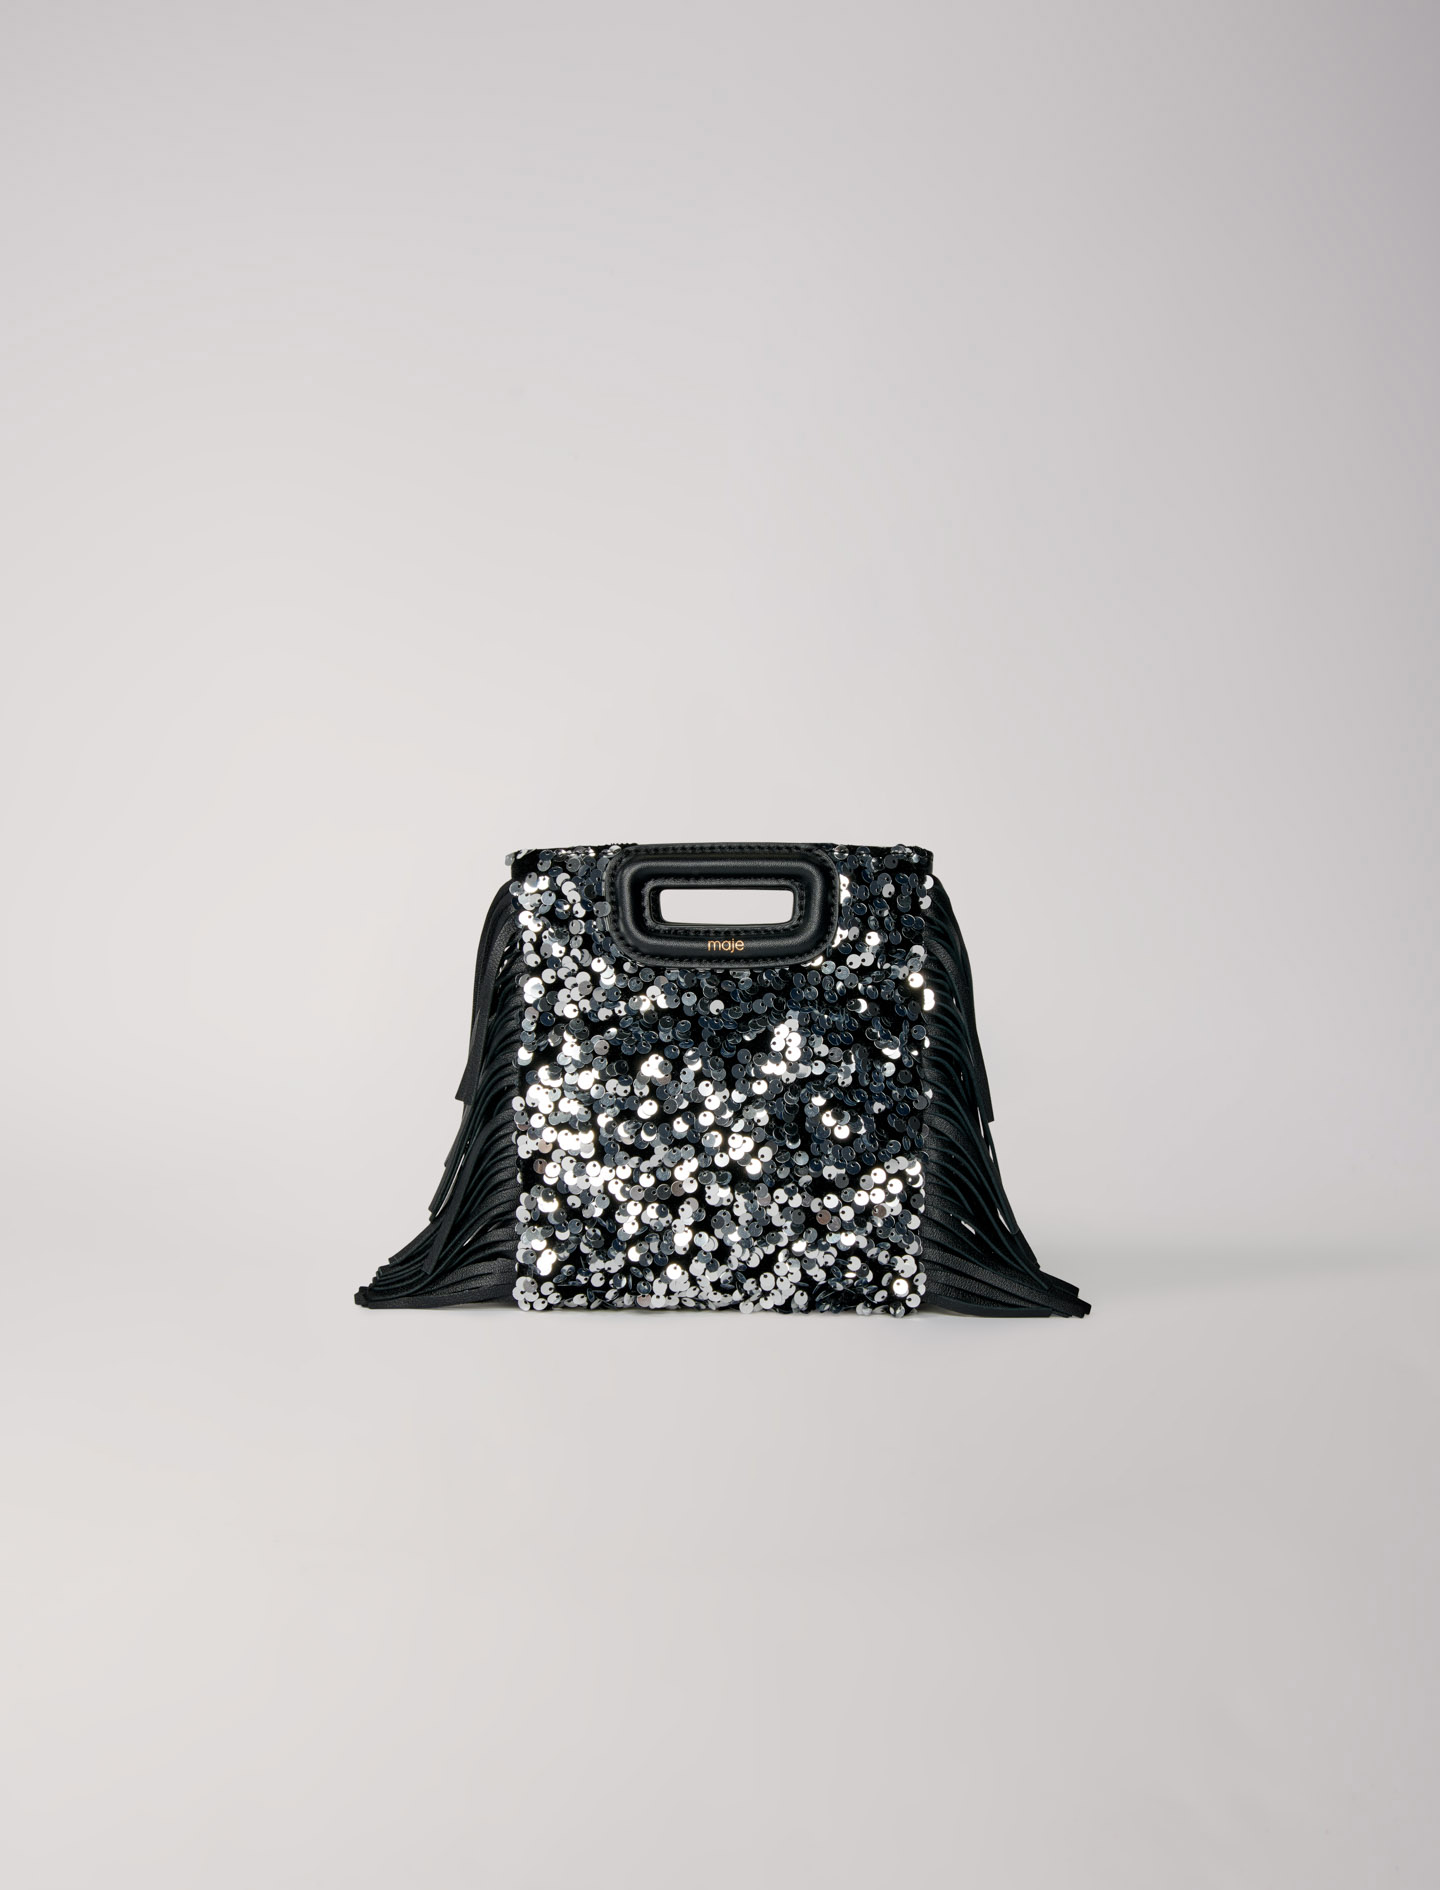 Mixte's polyester, Sequin mini M bag for Fall/Winter, size Mixte-All Bags-OS (ONE SIZE), in color Black / Black